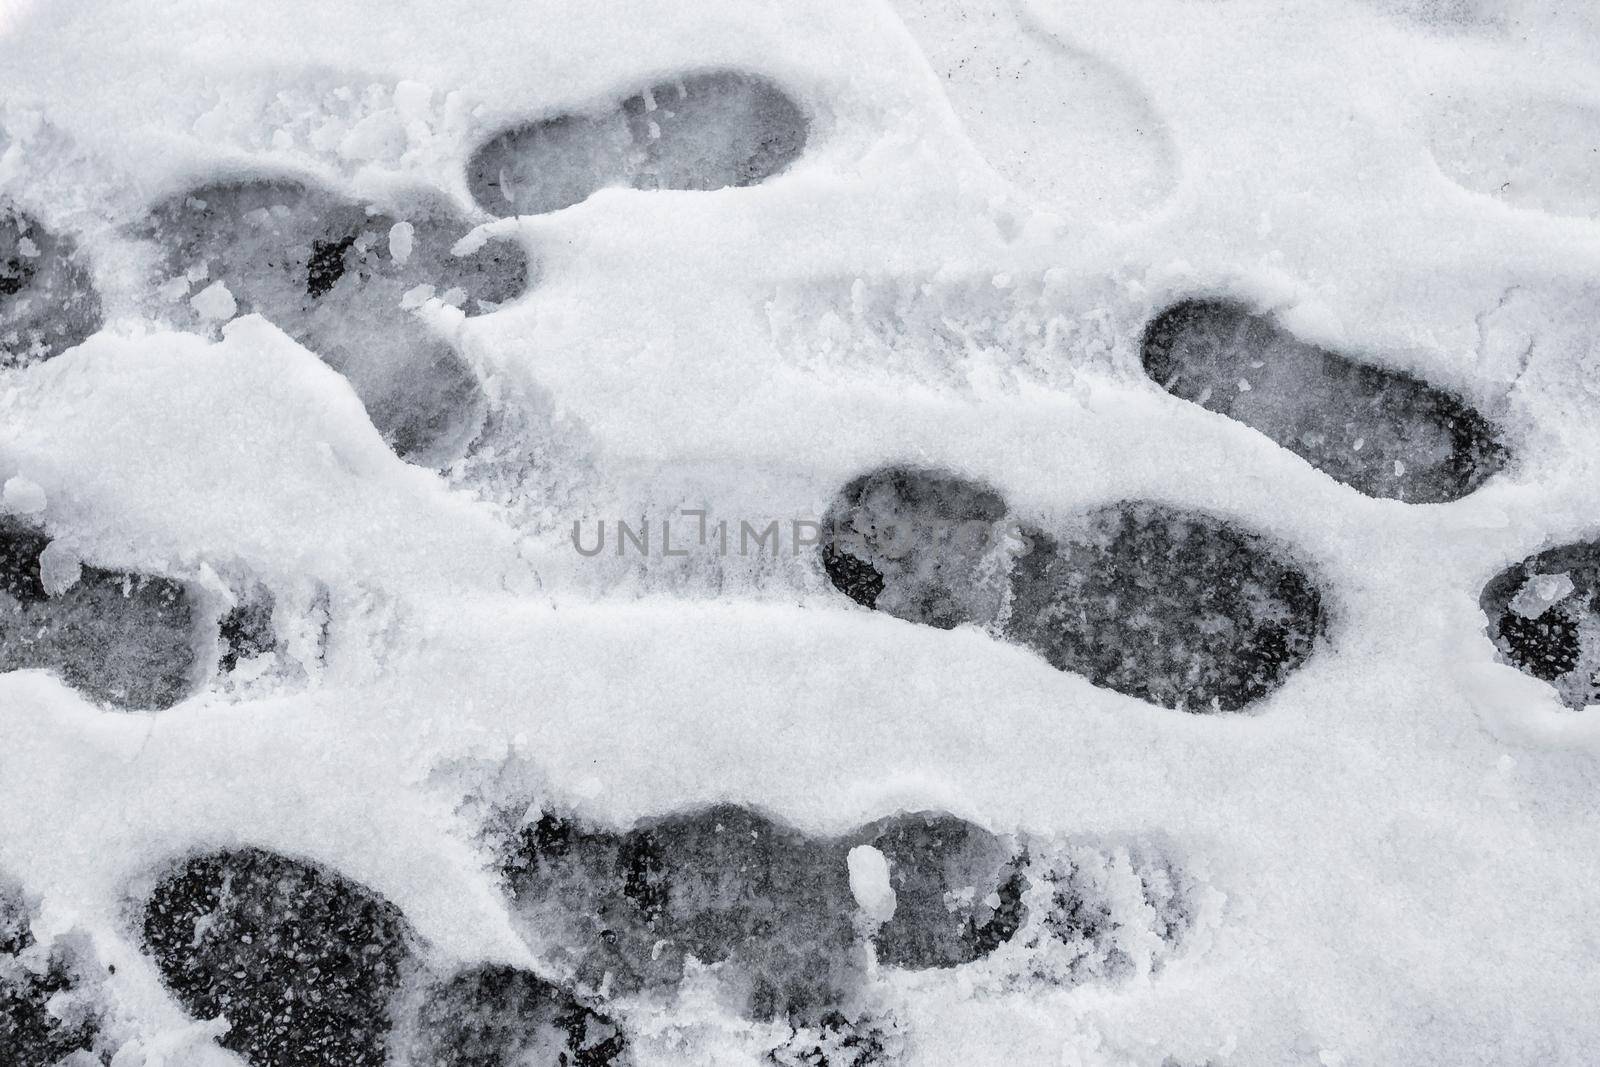 Lots of footprints in snow. It can be used as texture or background and concepts.